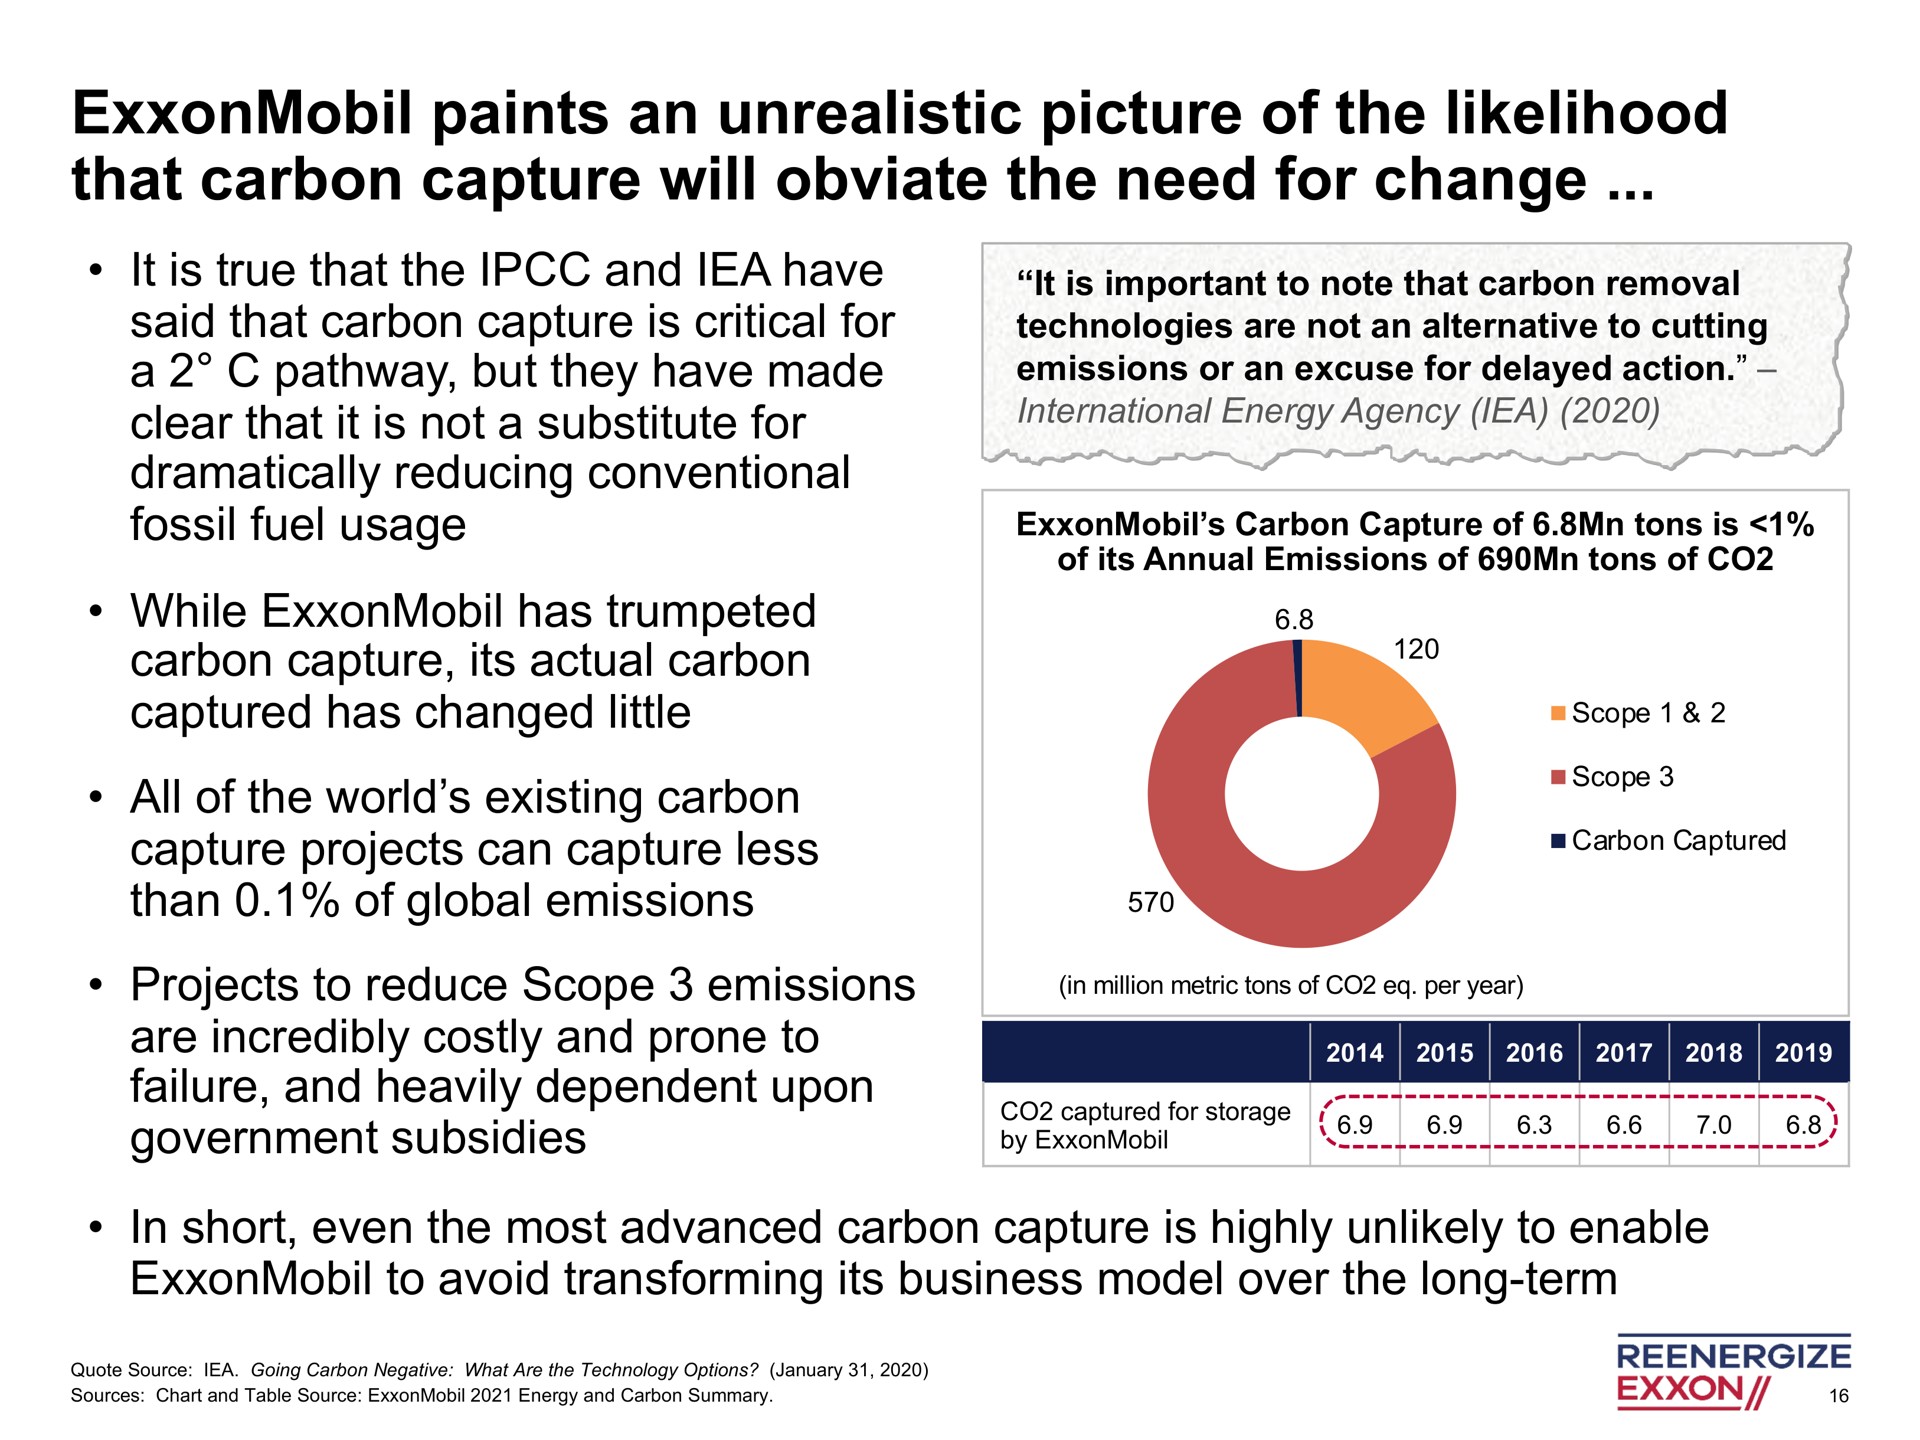 paints an unrealistic picture of the likelihood that carbon capture will obviate the need for change clear it is not a substitute international energy agency | Engine No. 1